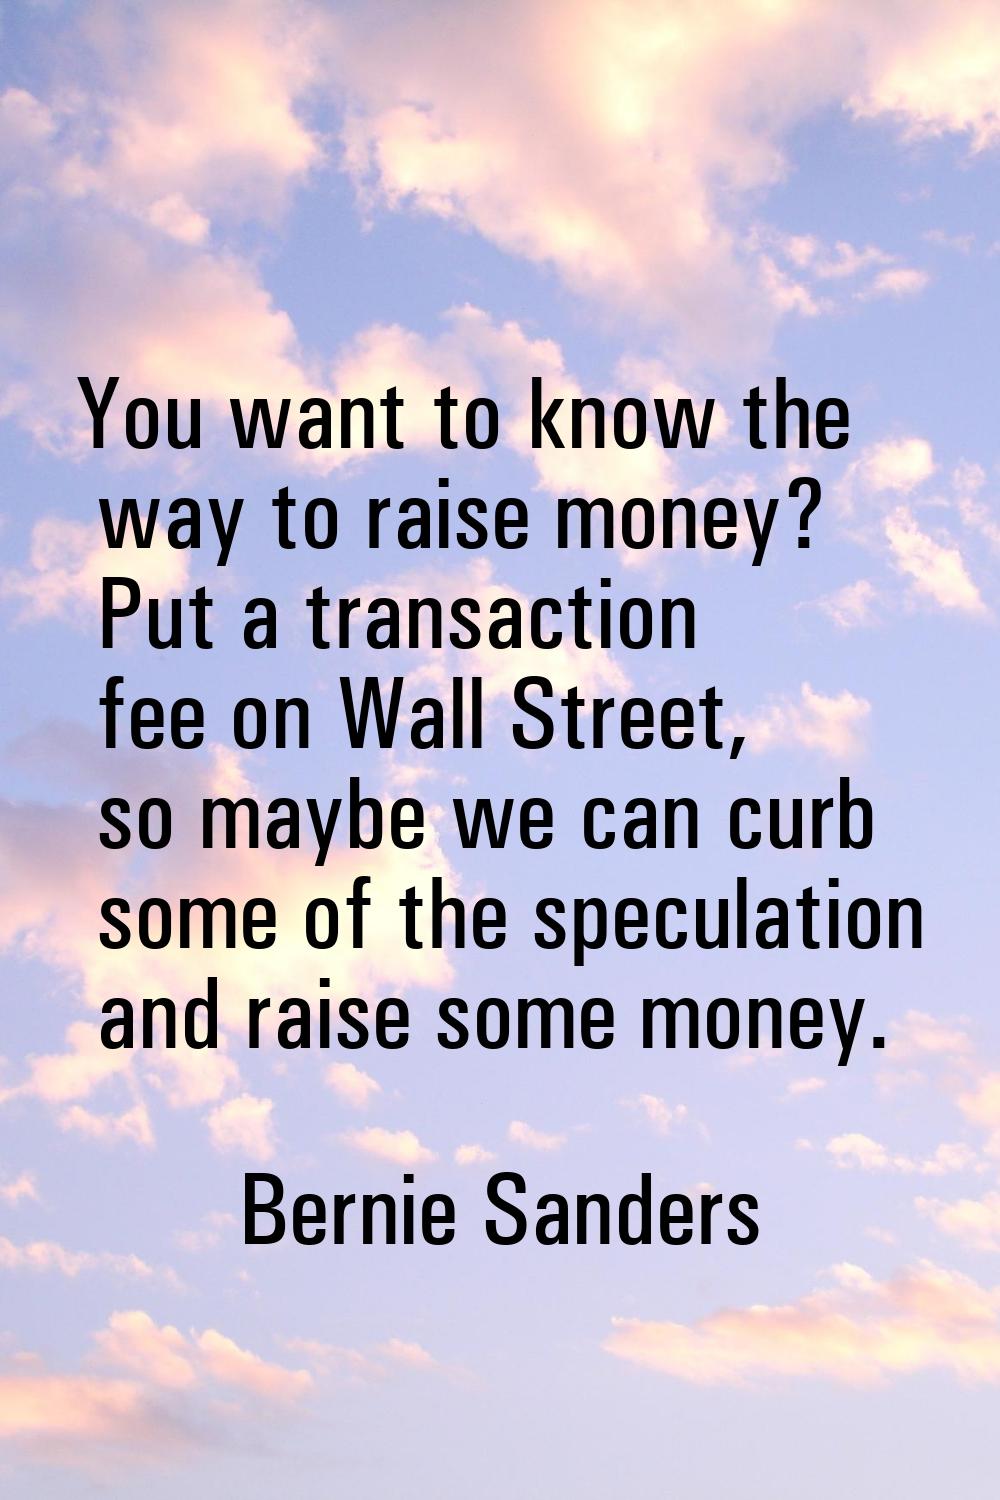 You want to know the way to raise money? Put a transaction fee on Wall Street, so maybe we can curb